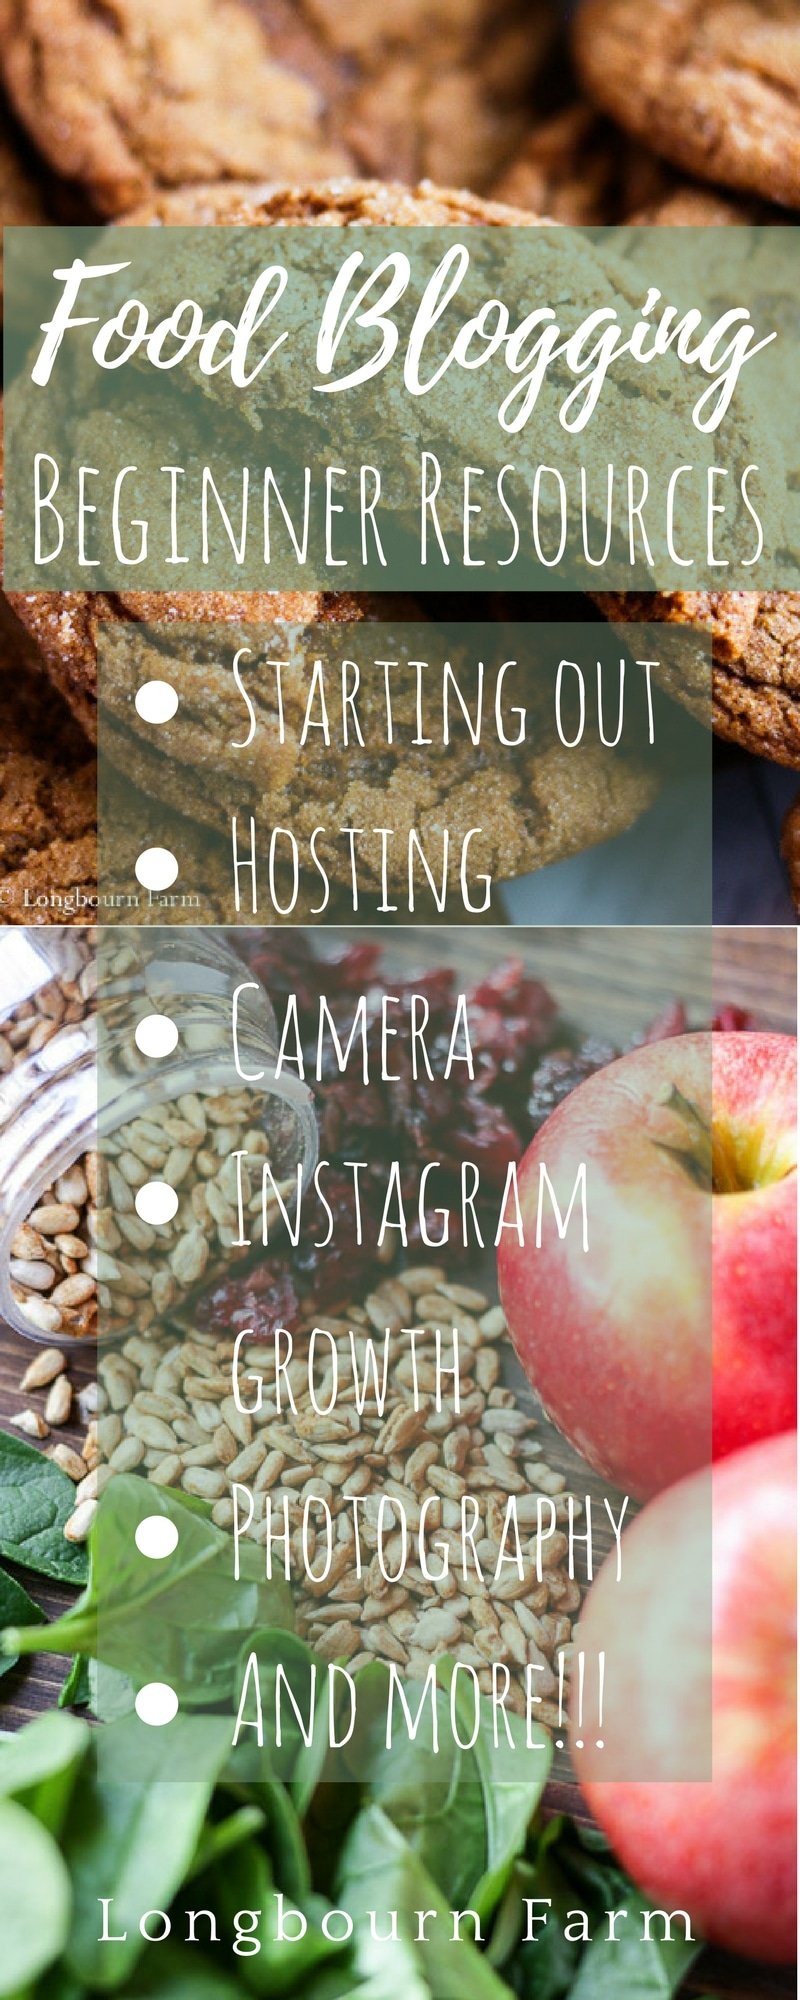 Starting a blog can be challenging, especially in such a huge industry like food blogging! Here are some of my favorite resources to help you get started on the right foot. This is everything I wish I would have known when starting out!